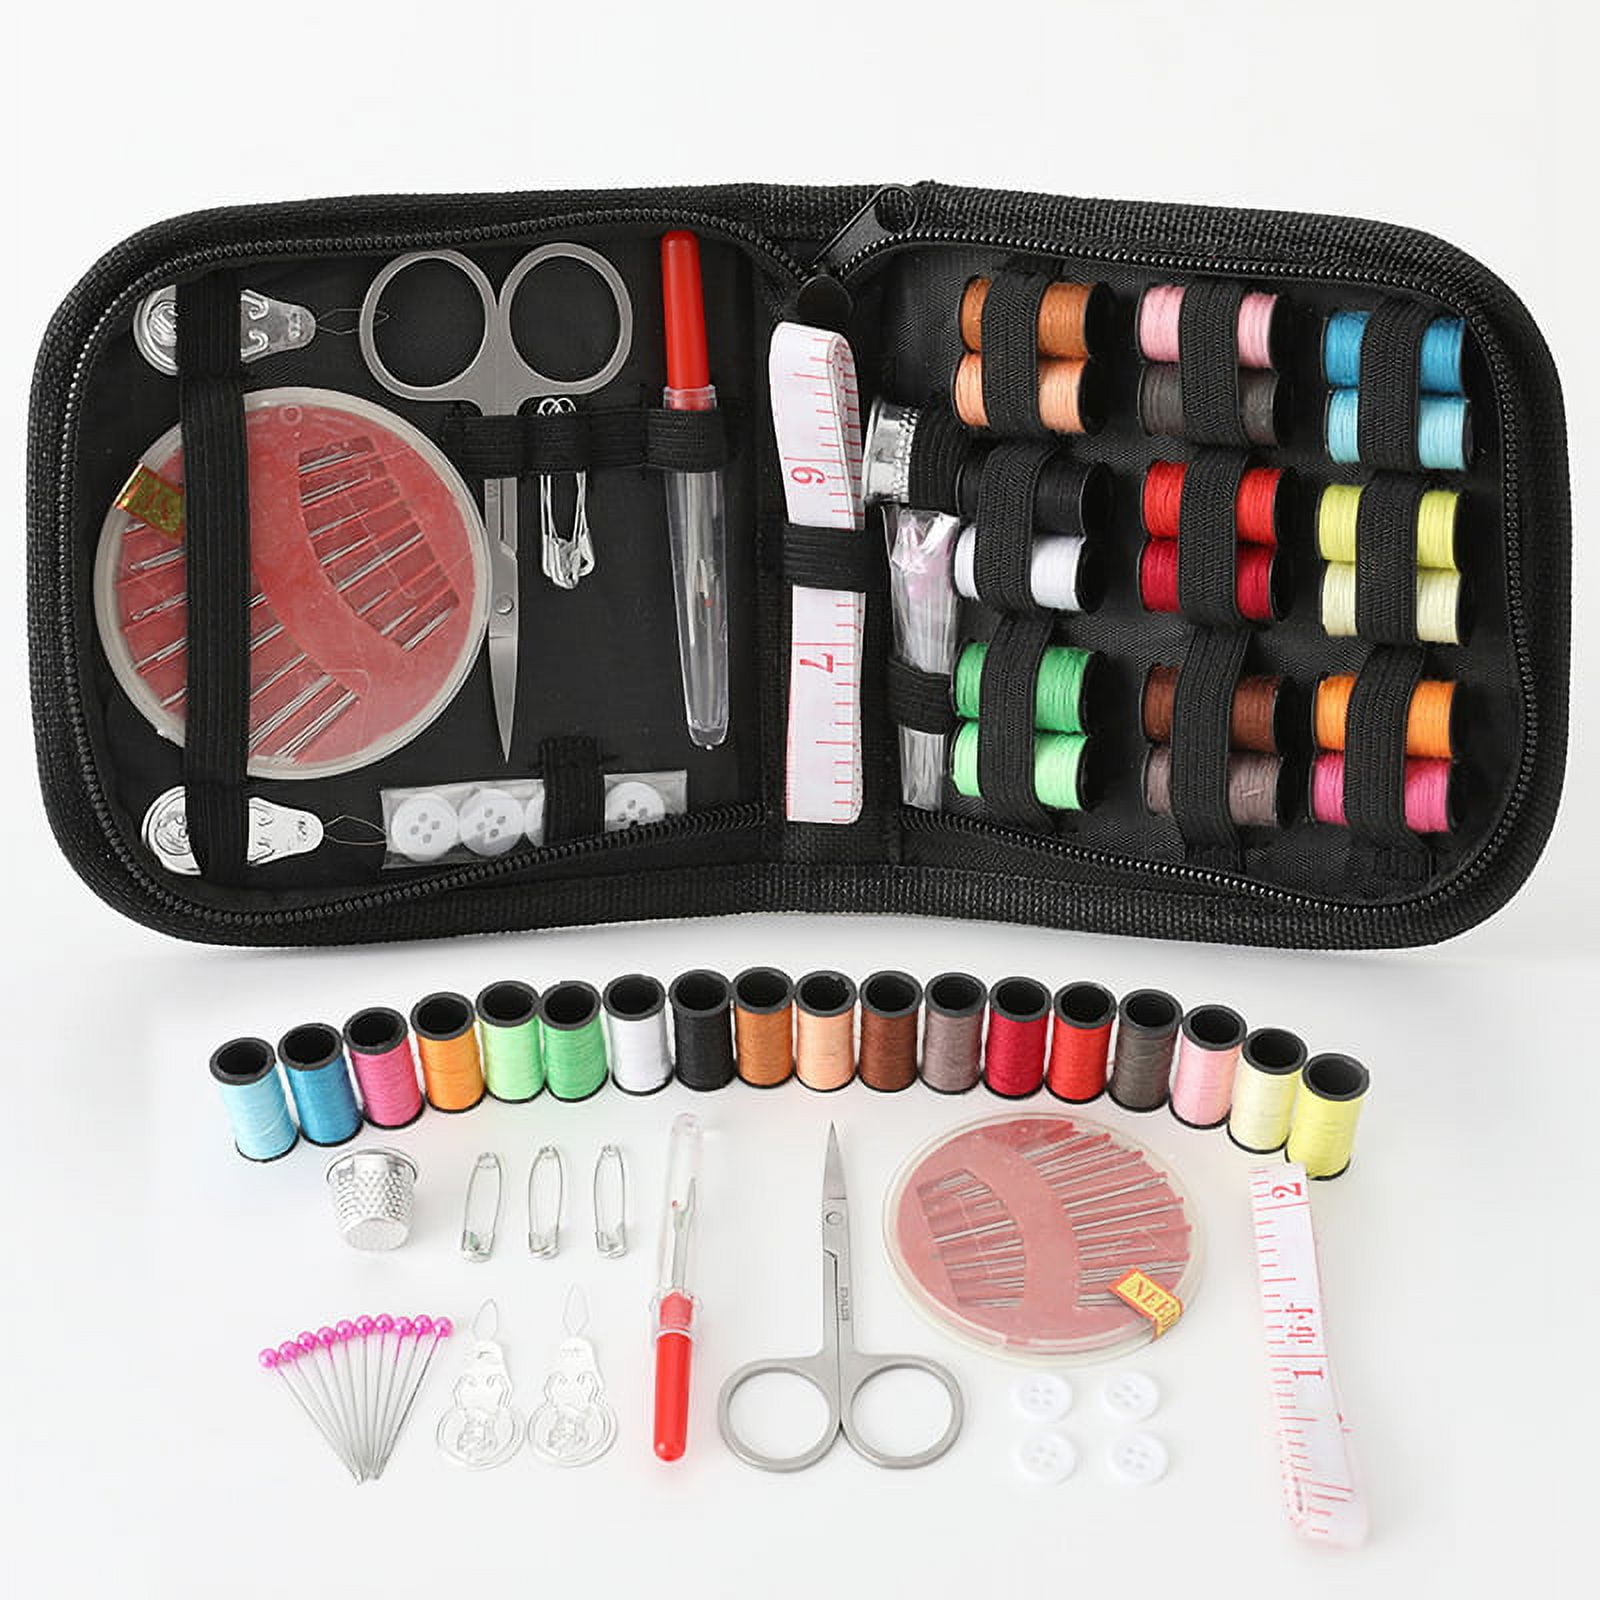 Sewing Kit for Adults - over 100 Sewing Supplies and Accessories